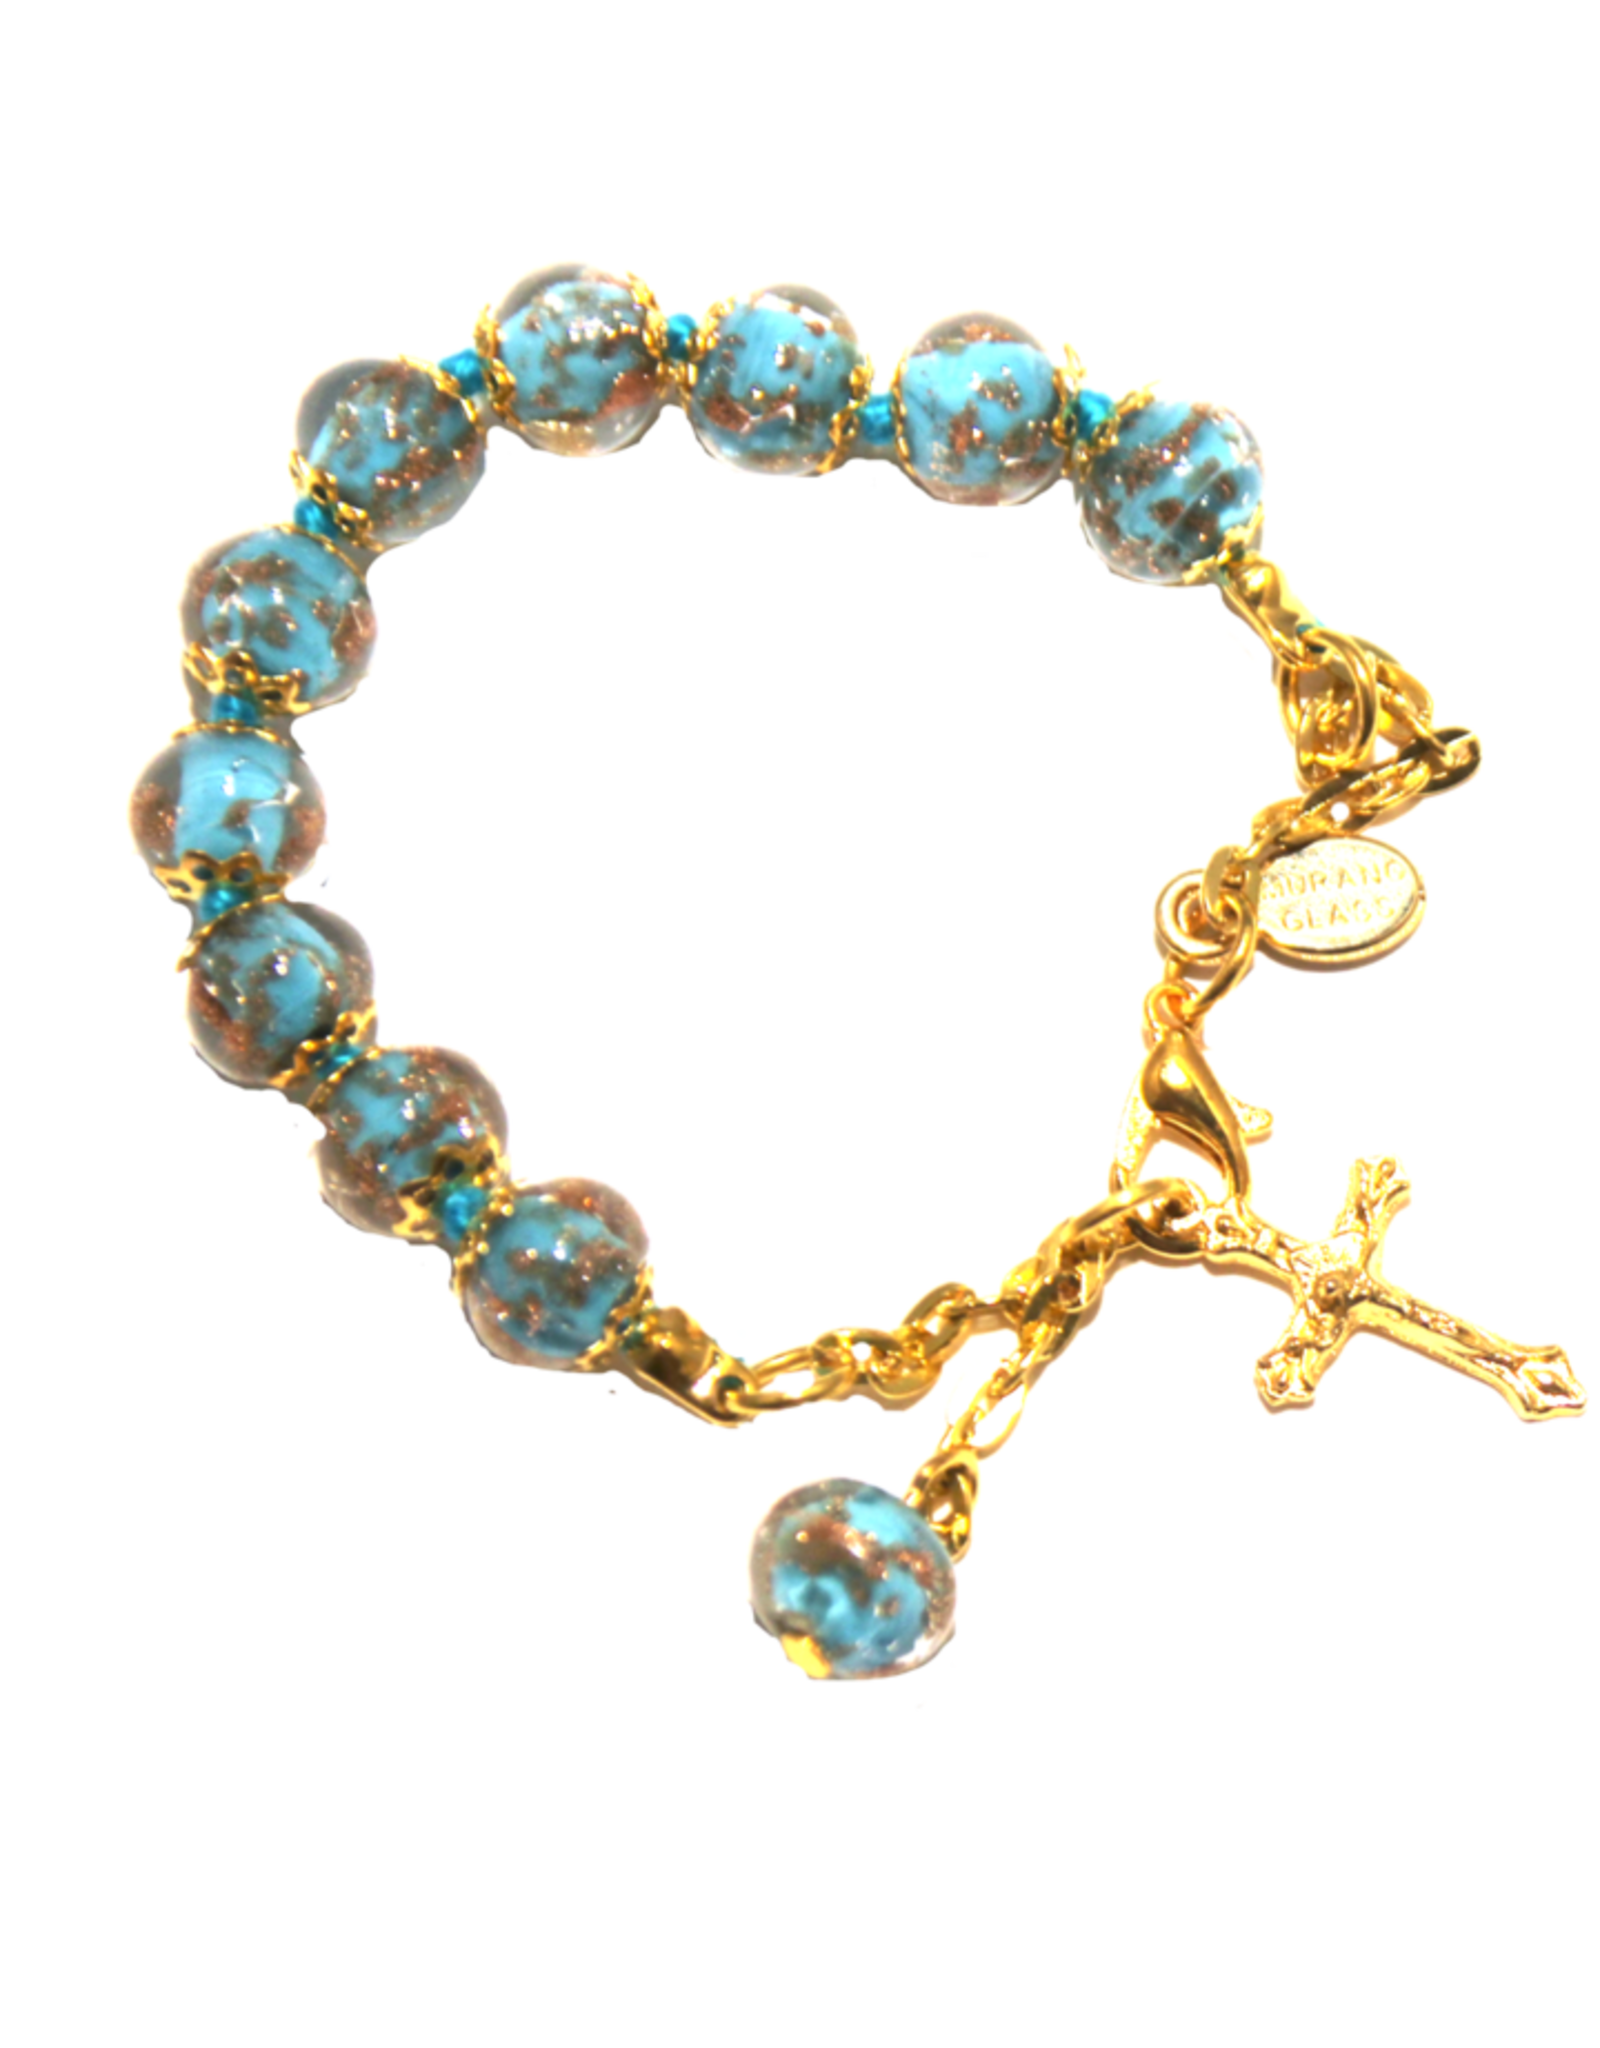 Tuscan Hills Bracelet - Turquoise Murano Glass with Handknotted Sommerso Beads & Crucifix